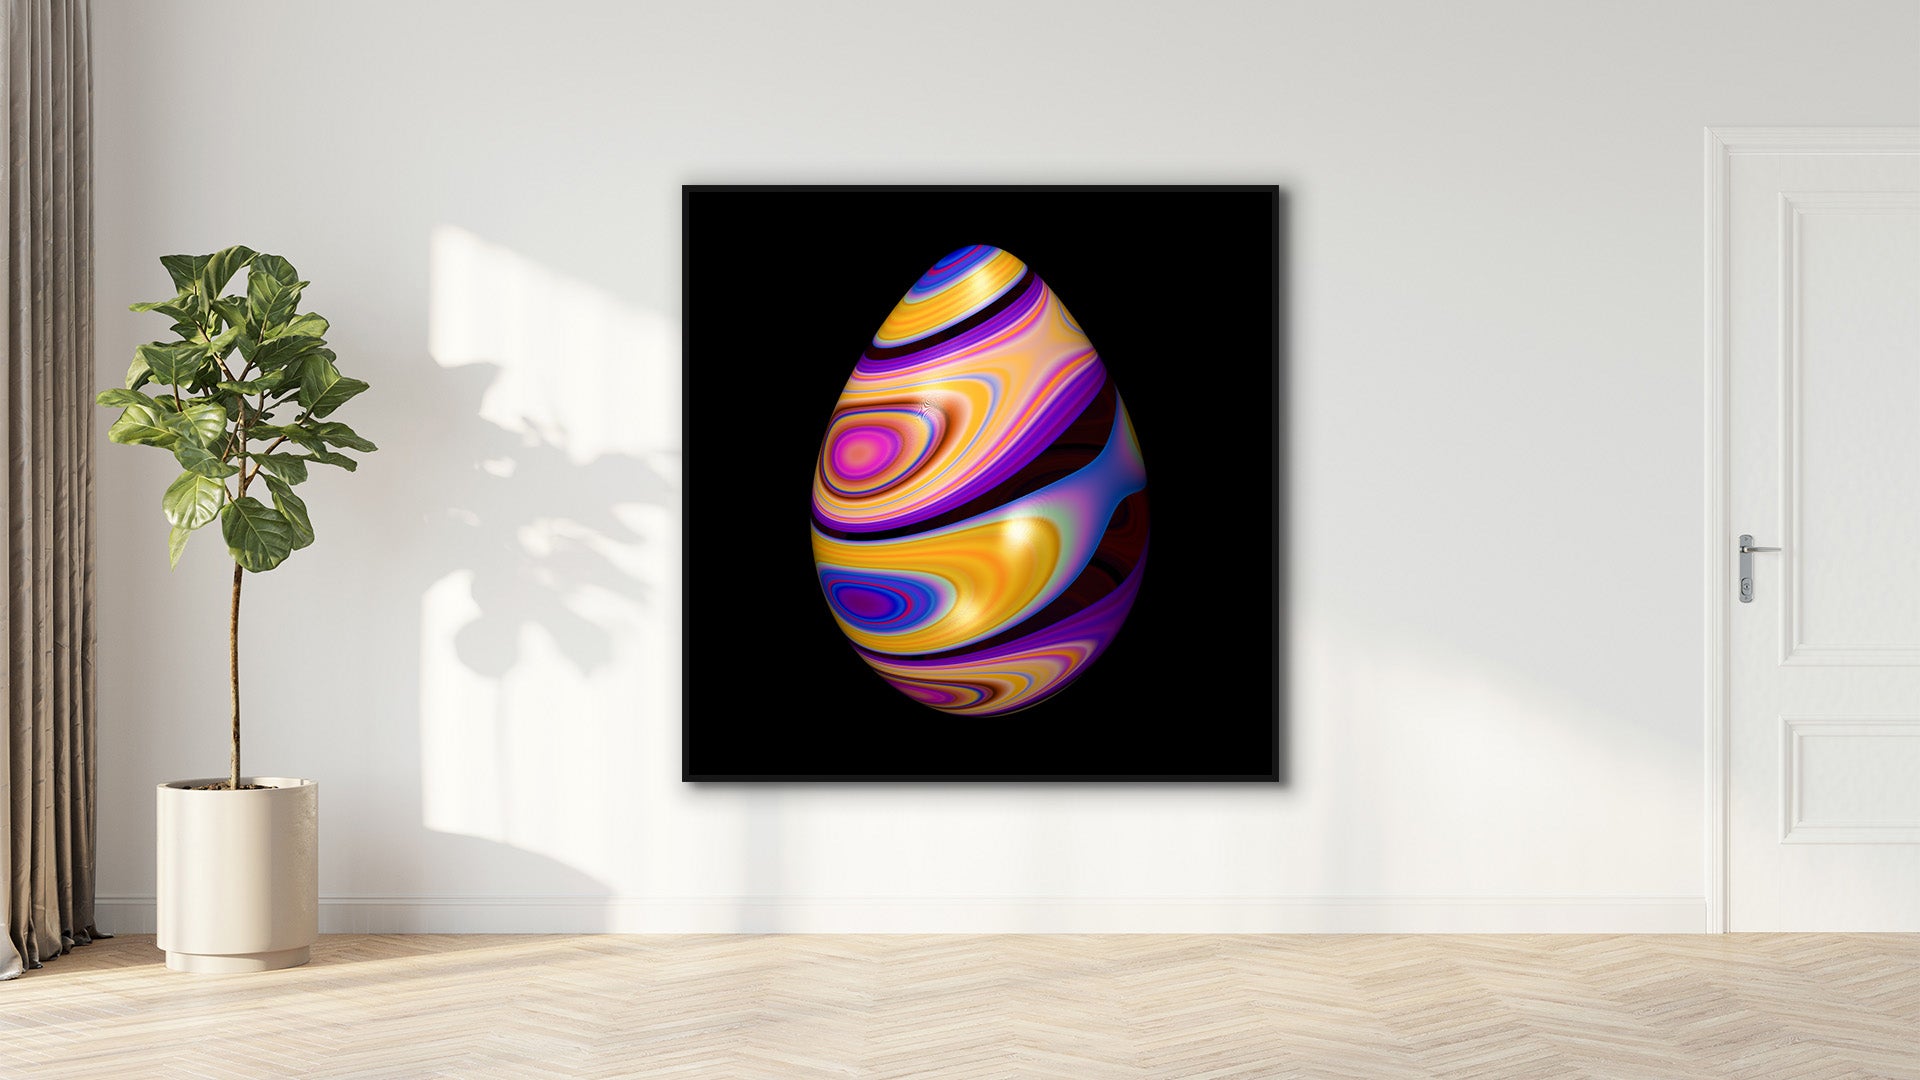 Translucent Red Egg with Colourful Marbled Bands - Scarlet Prism